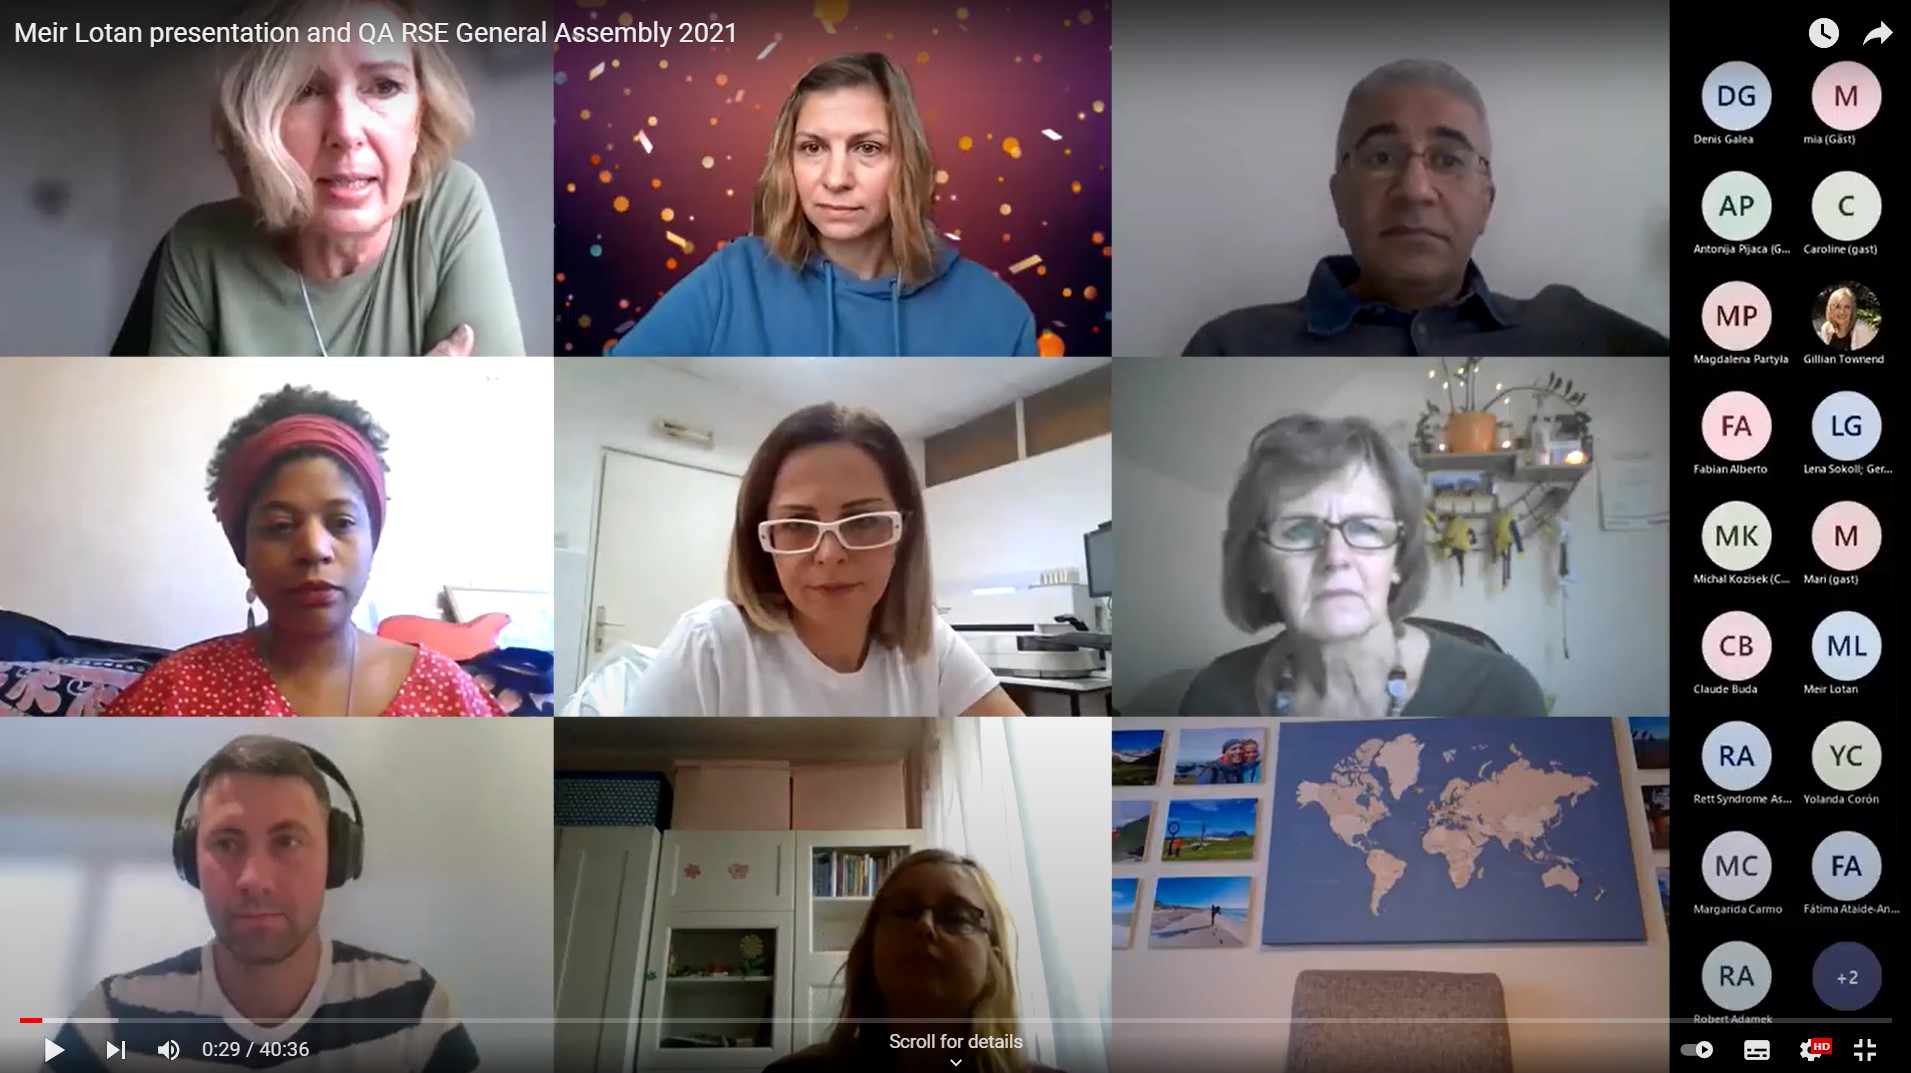 General Assembly activity report and recordings of presentations